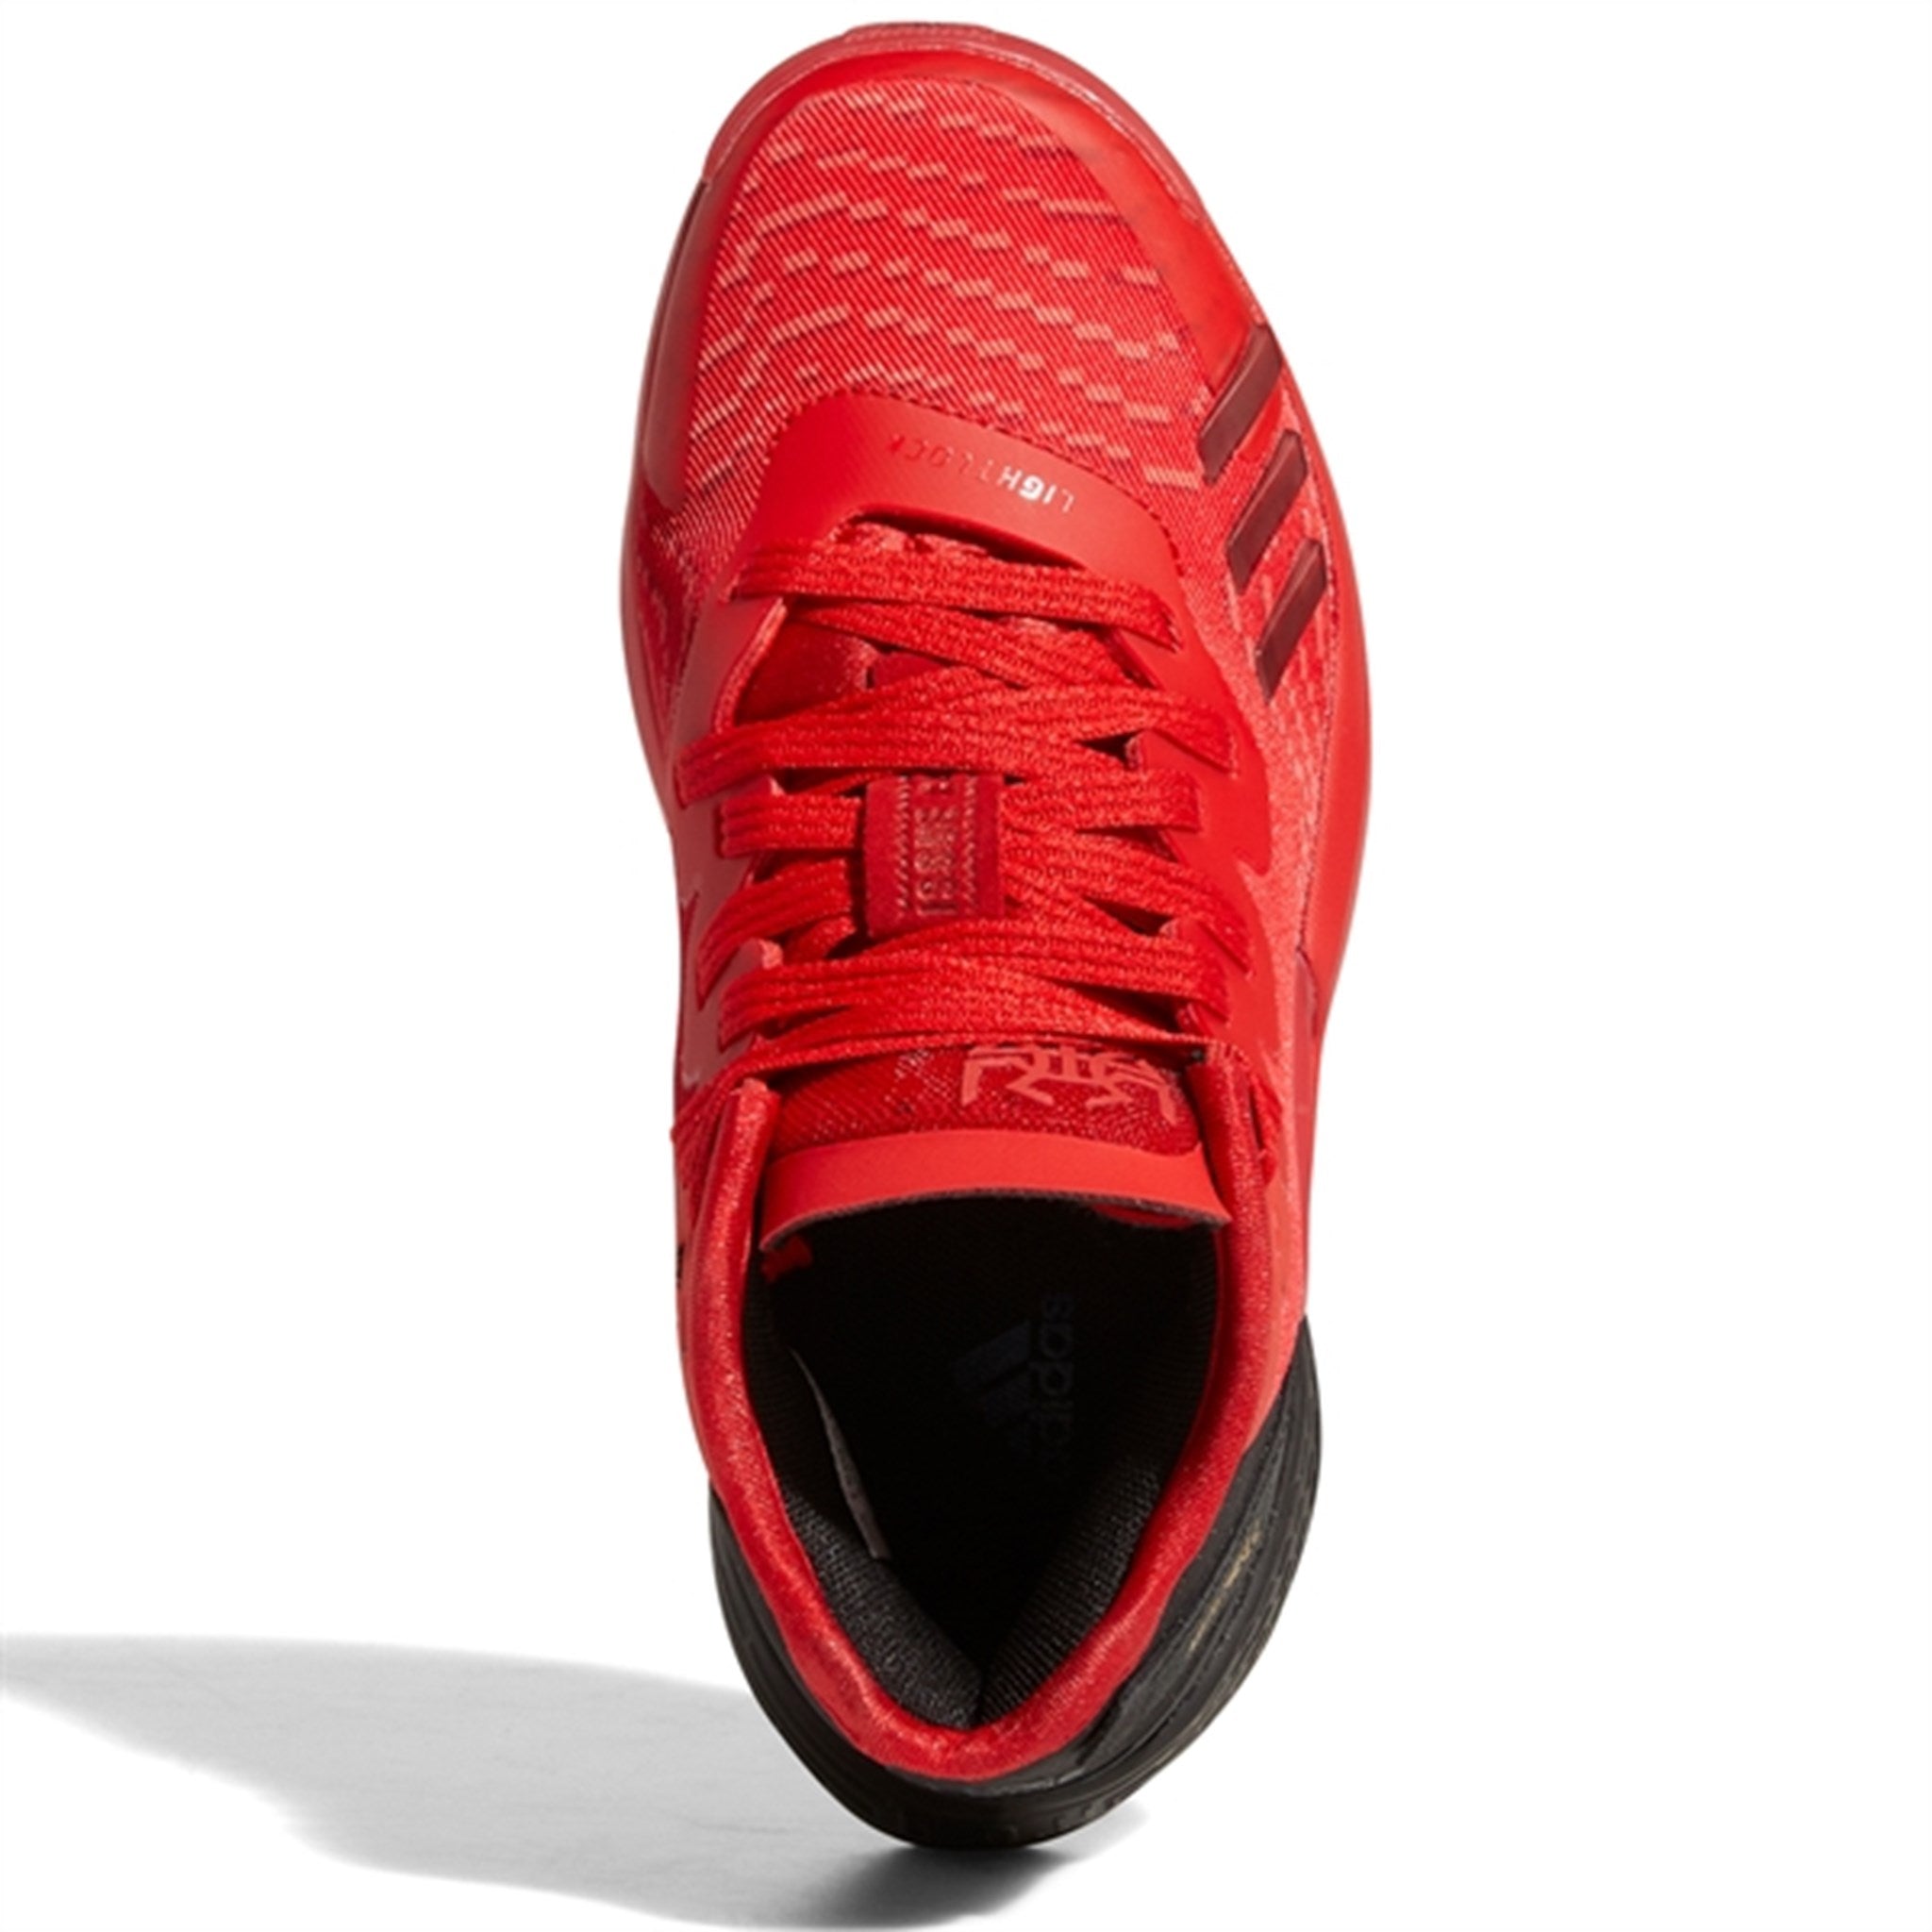 adidas D.O.N. Issue Sneakers Vivid Red 2